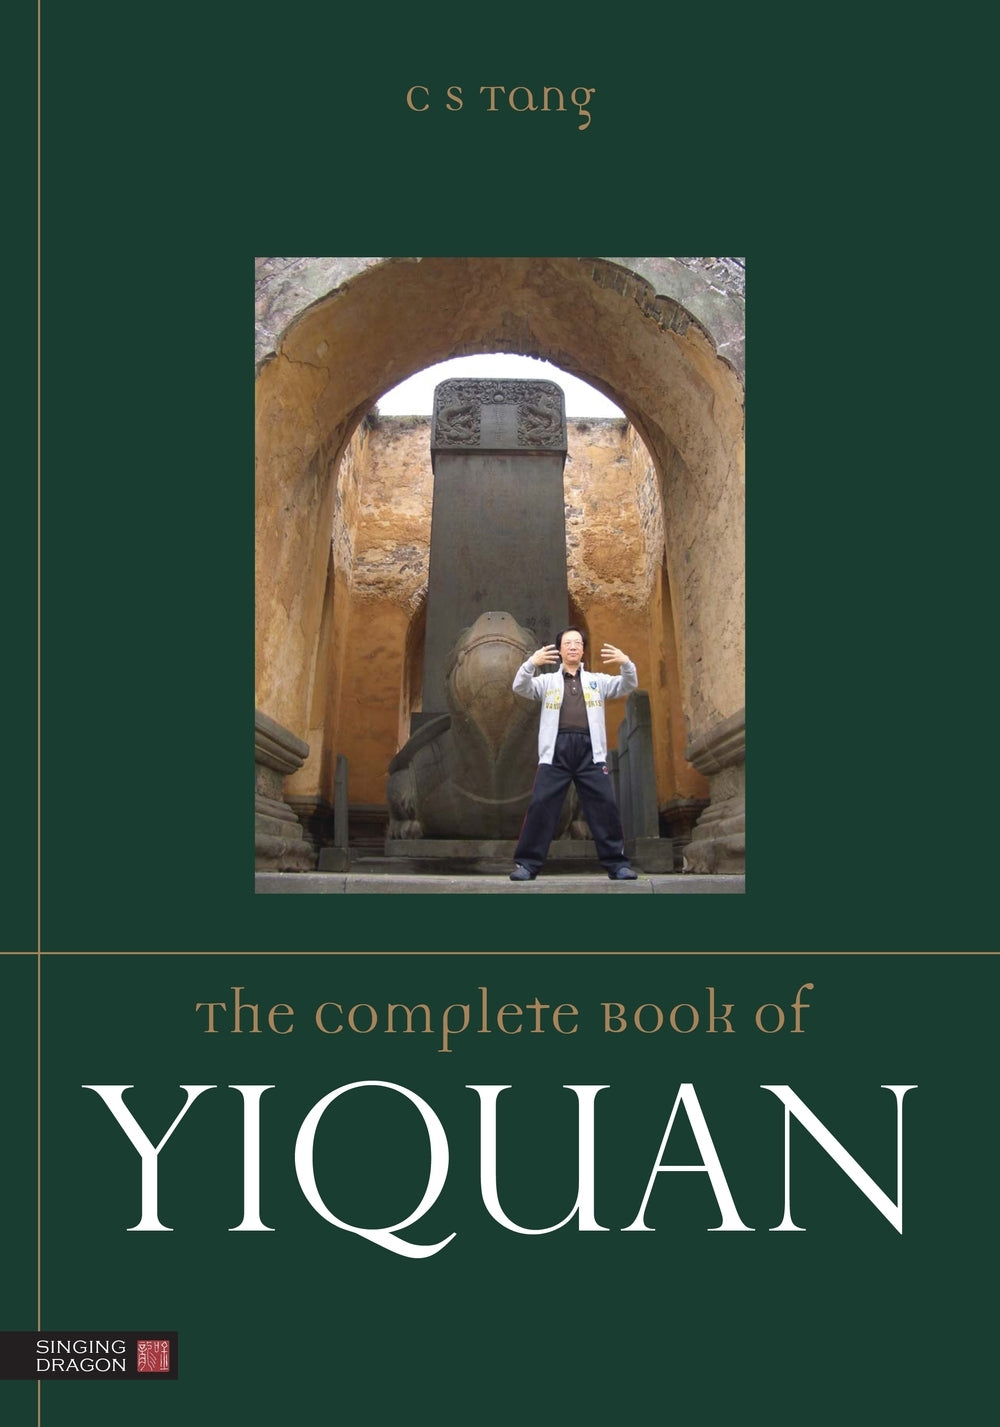 The Complete Book of Yiquan by Tang Cheong Shing